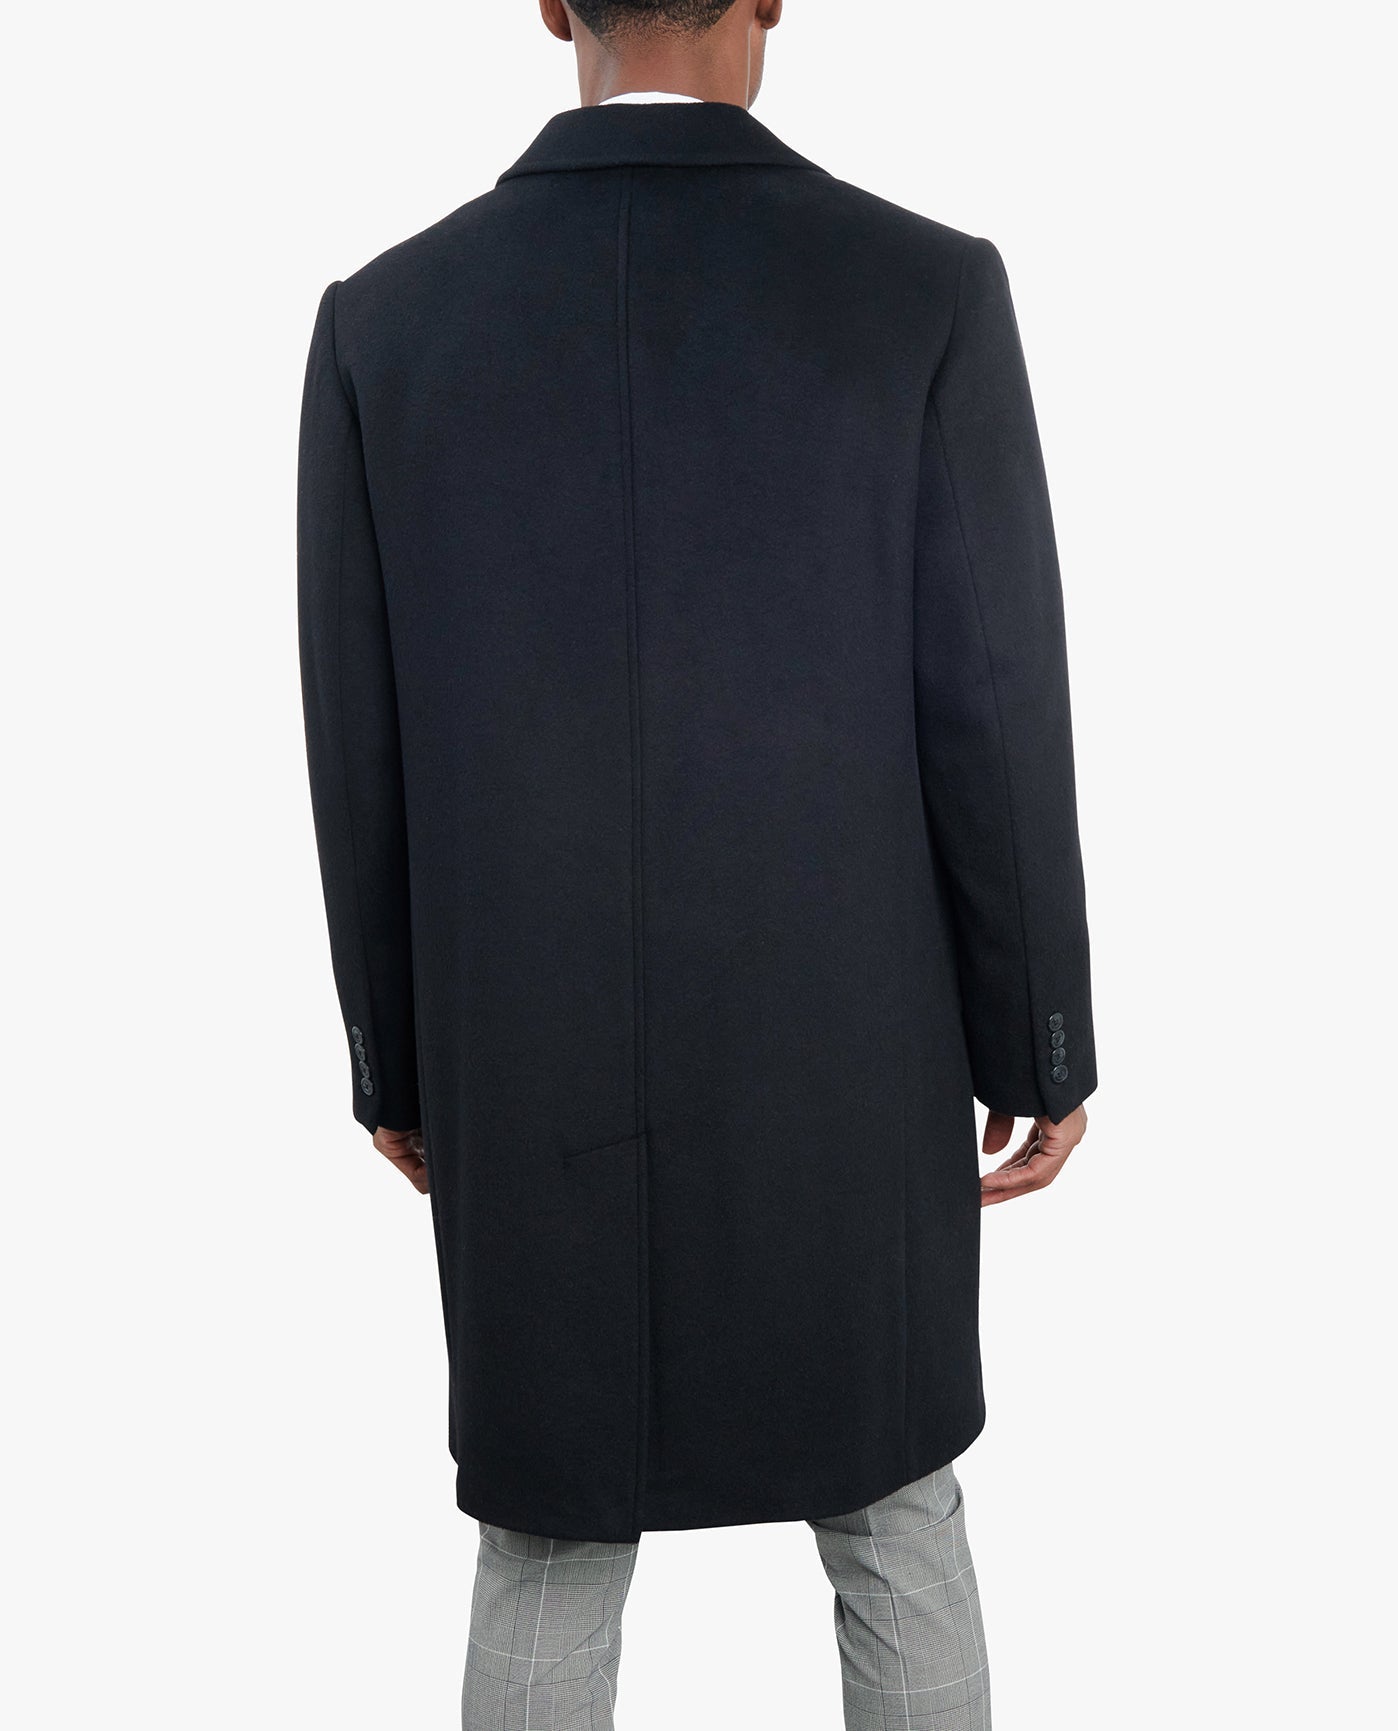 BACK VIEW OF SIGNATURE 42" SINGLE BREASTED WOOL JACKET | BLACK